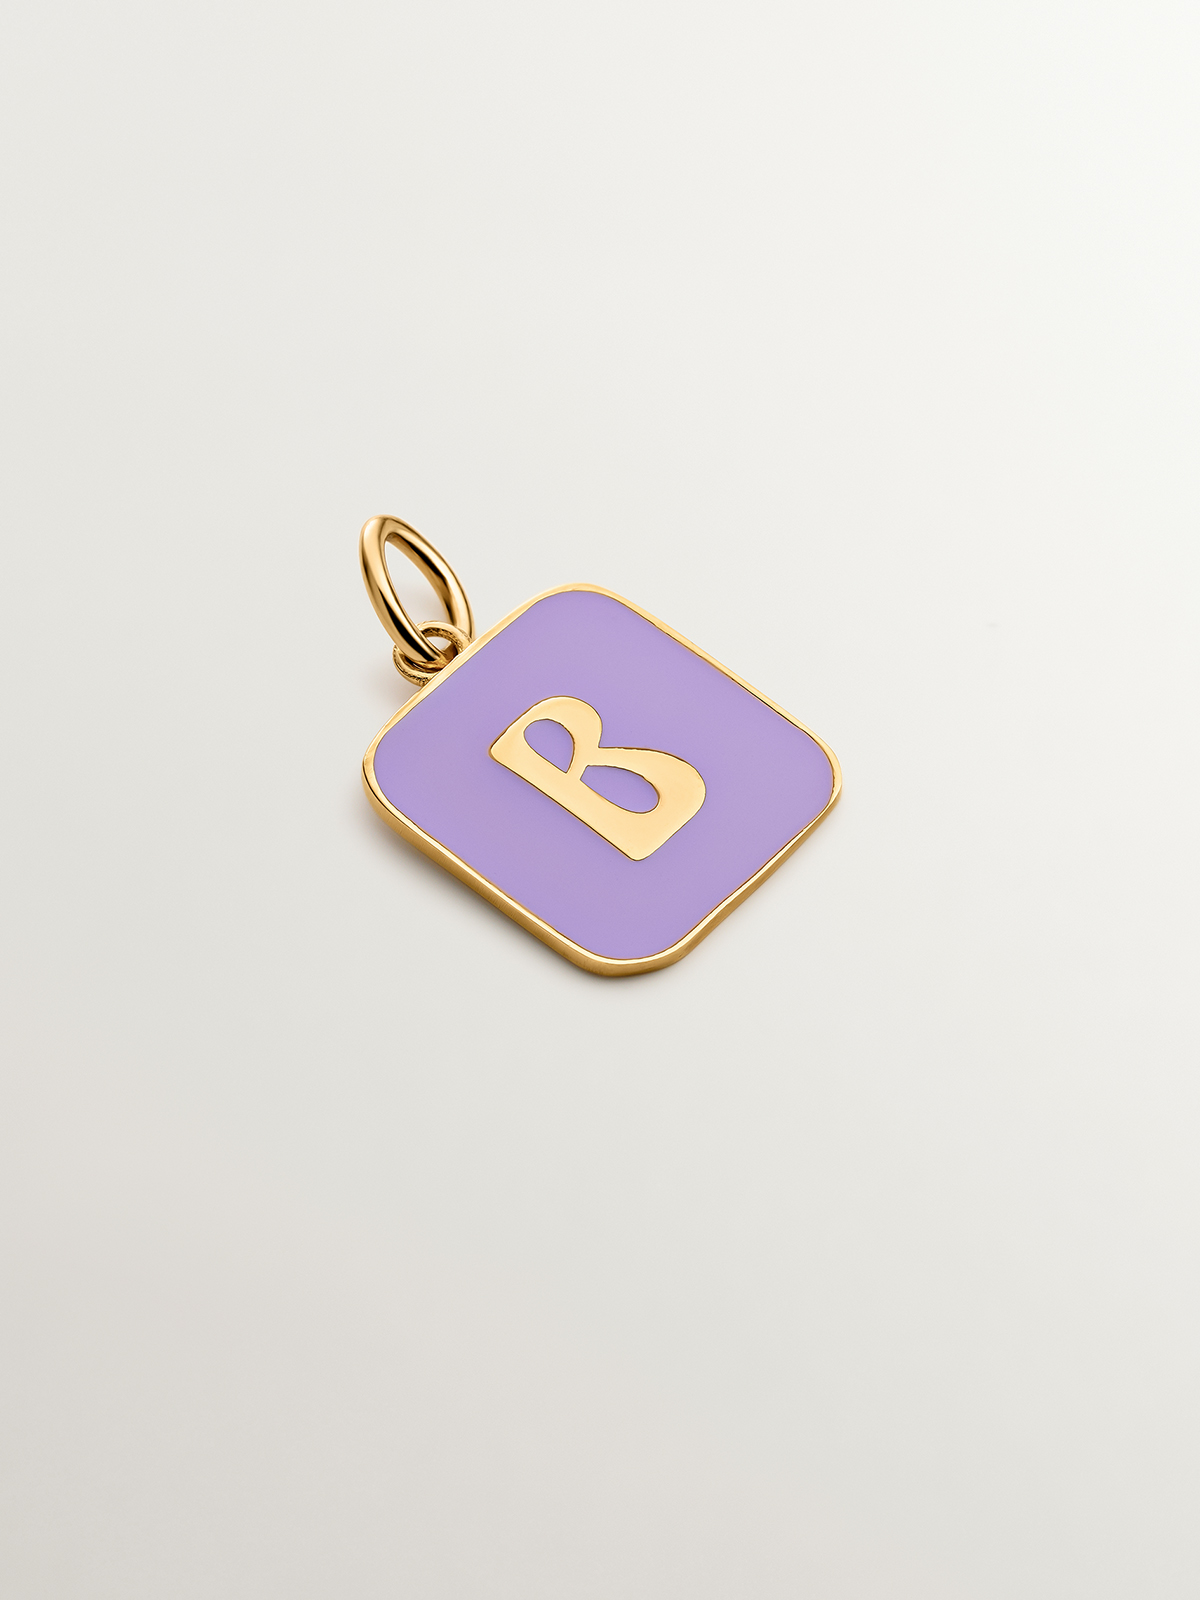 18K yellow gold plated 925 sterling silver charm with initial B and lilac enamel in a square shape